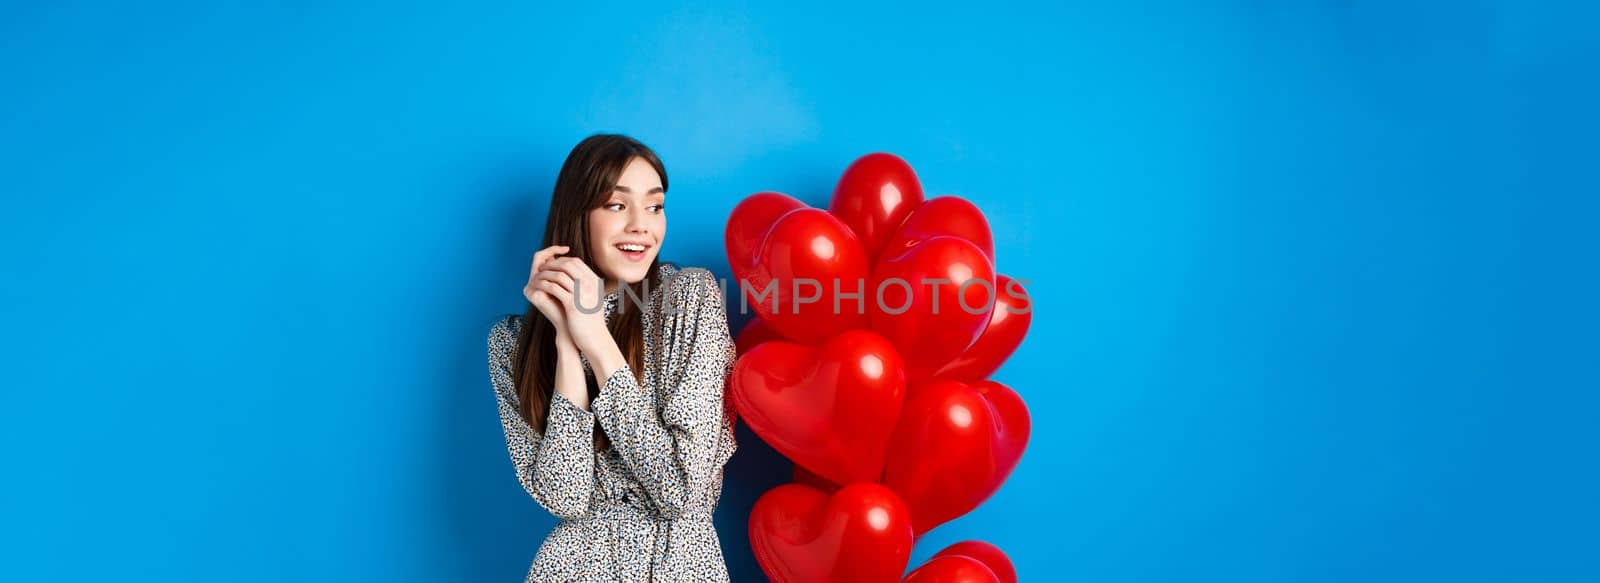 Valentines day. Beautiful romantic girl dreaming off date, standing near lovely heart balloons and smiling, blue background.